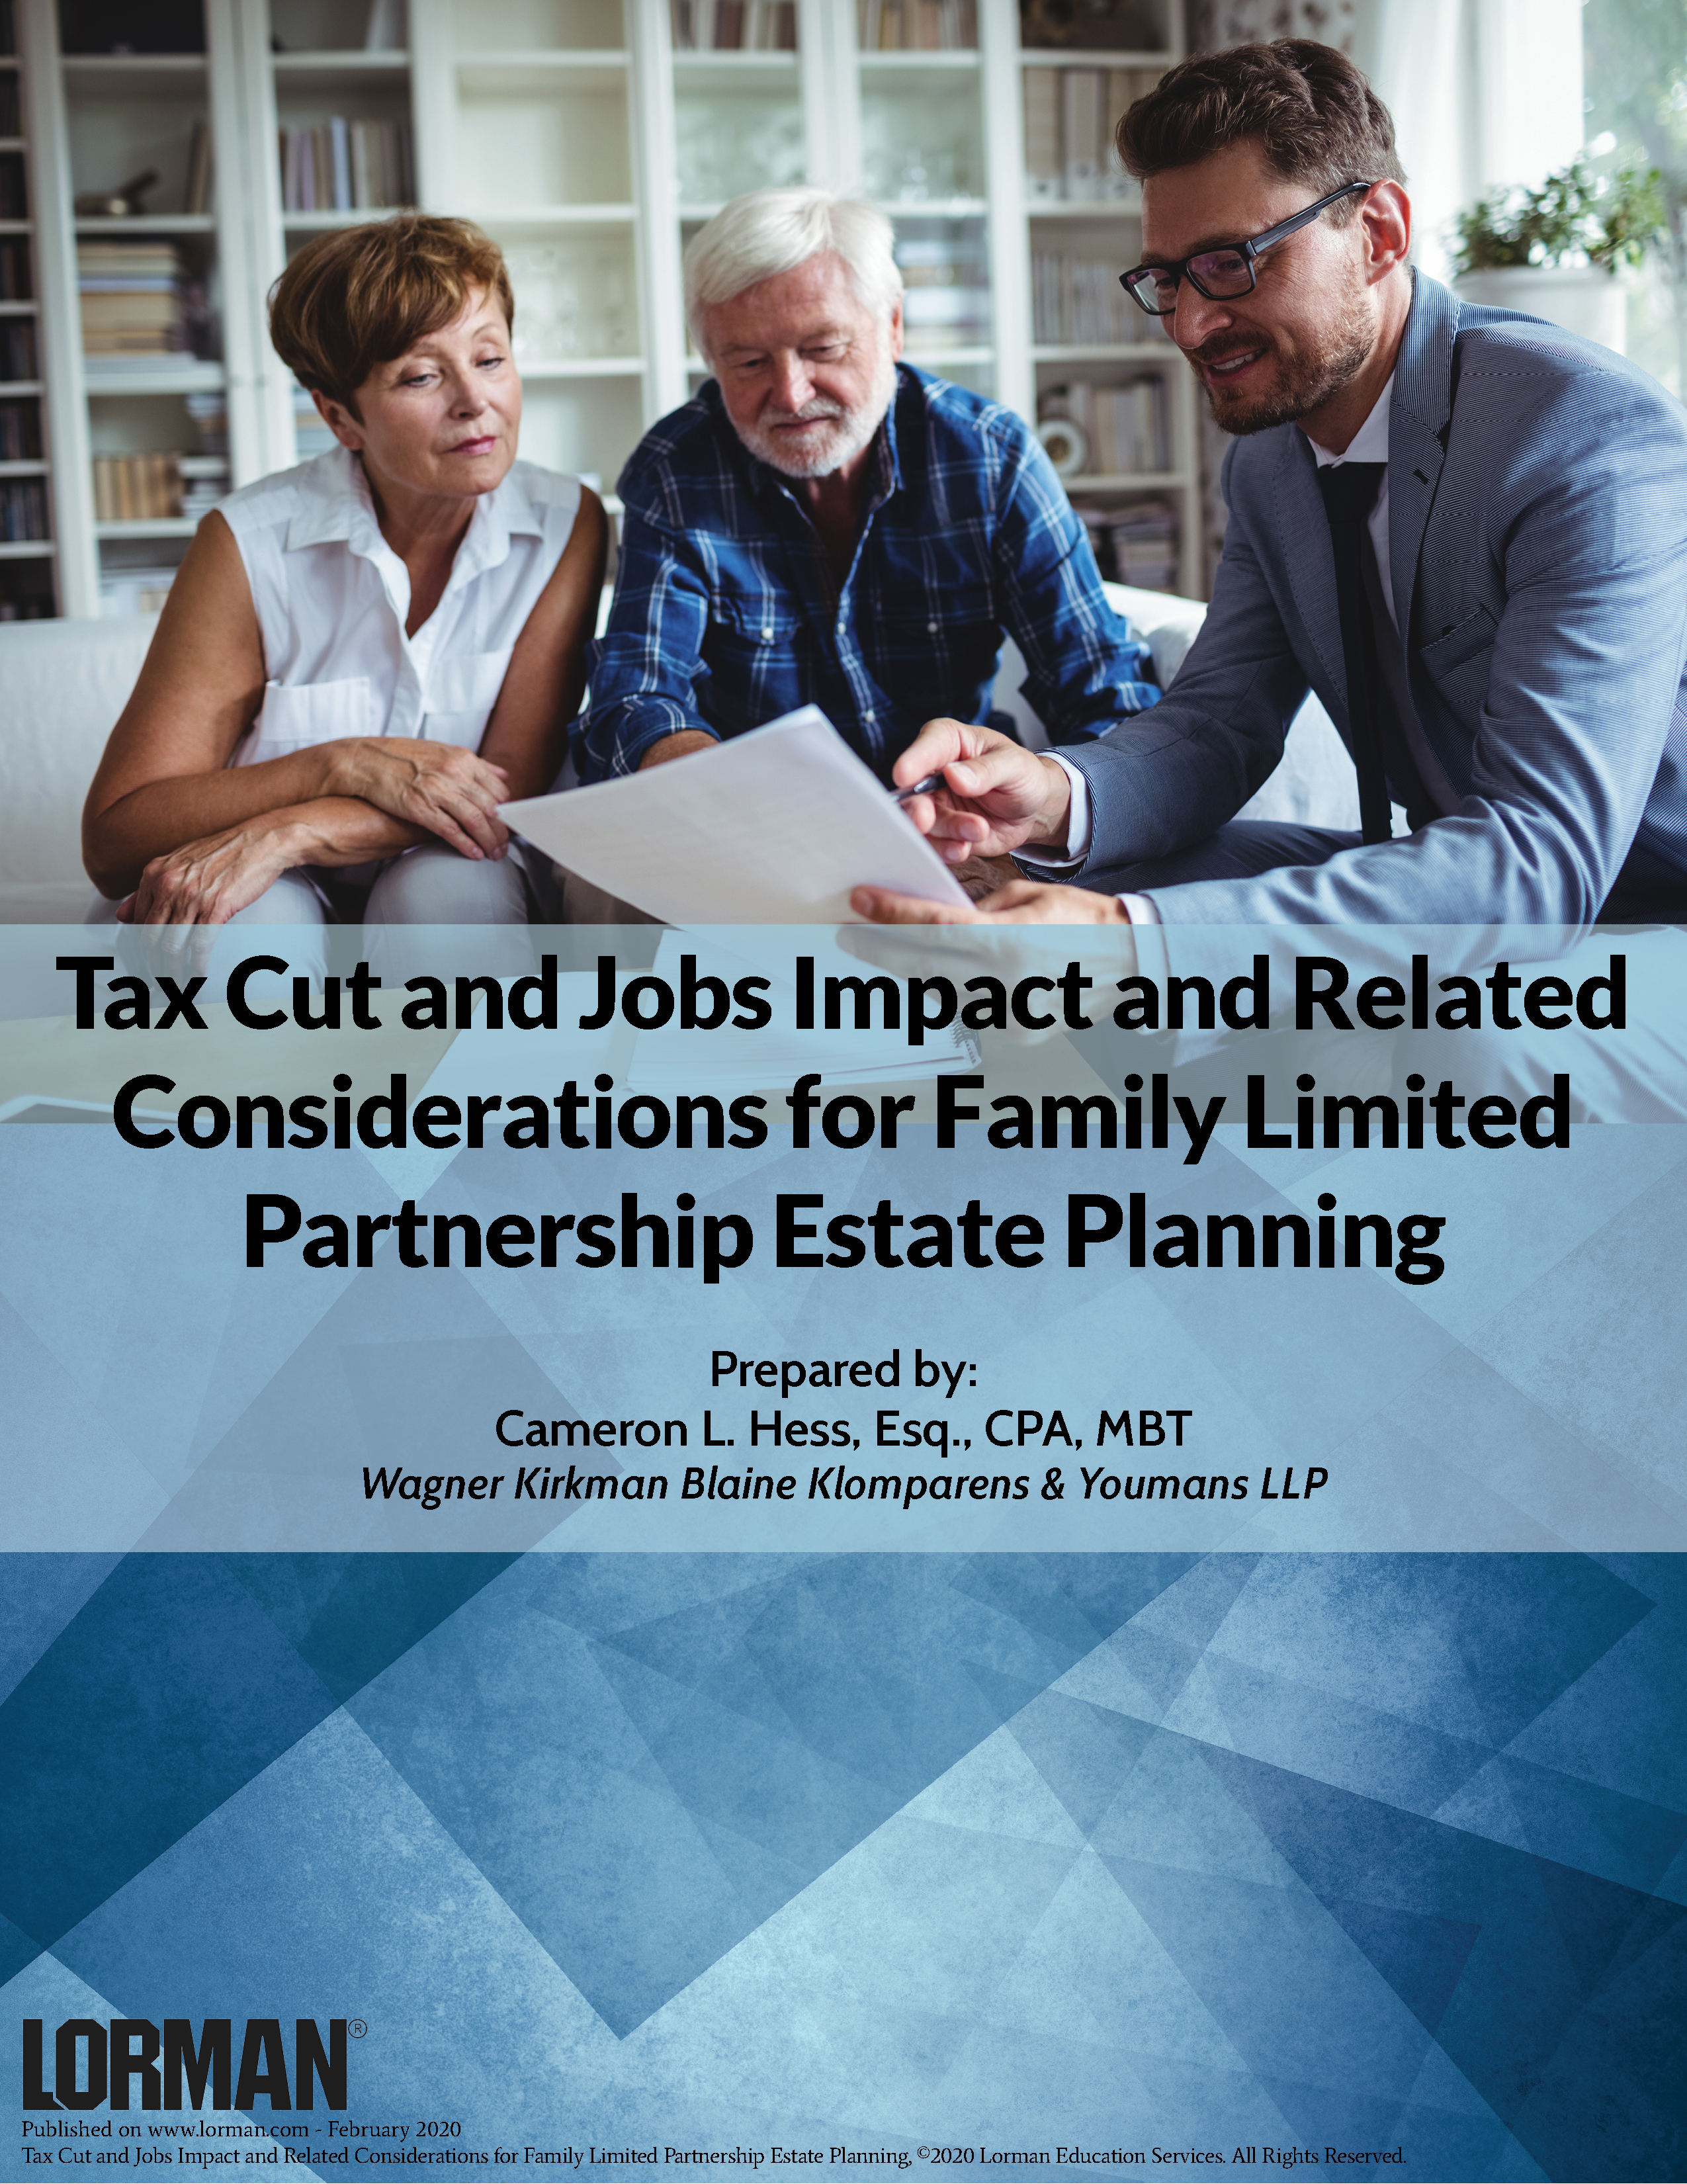 Tax Cut and Jobs Impact and Related Considerations for Family Limited Partnership Estate Planning